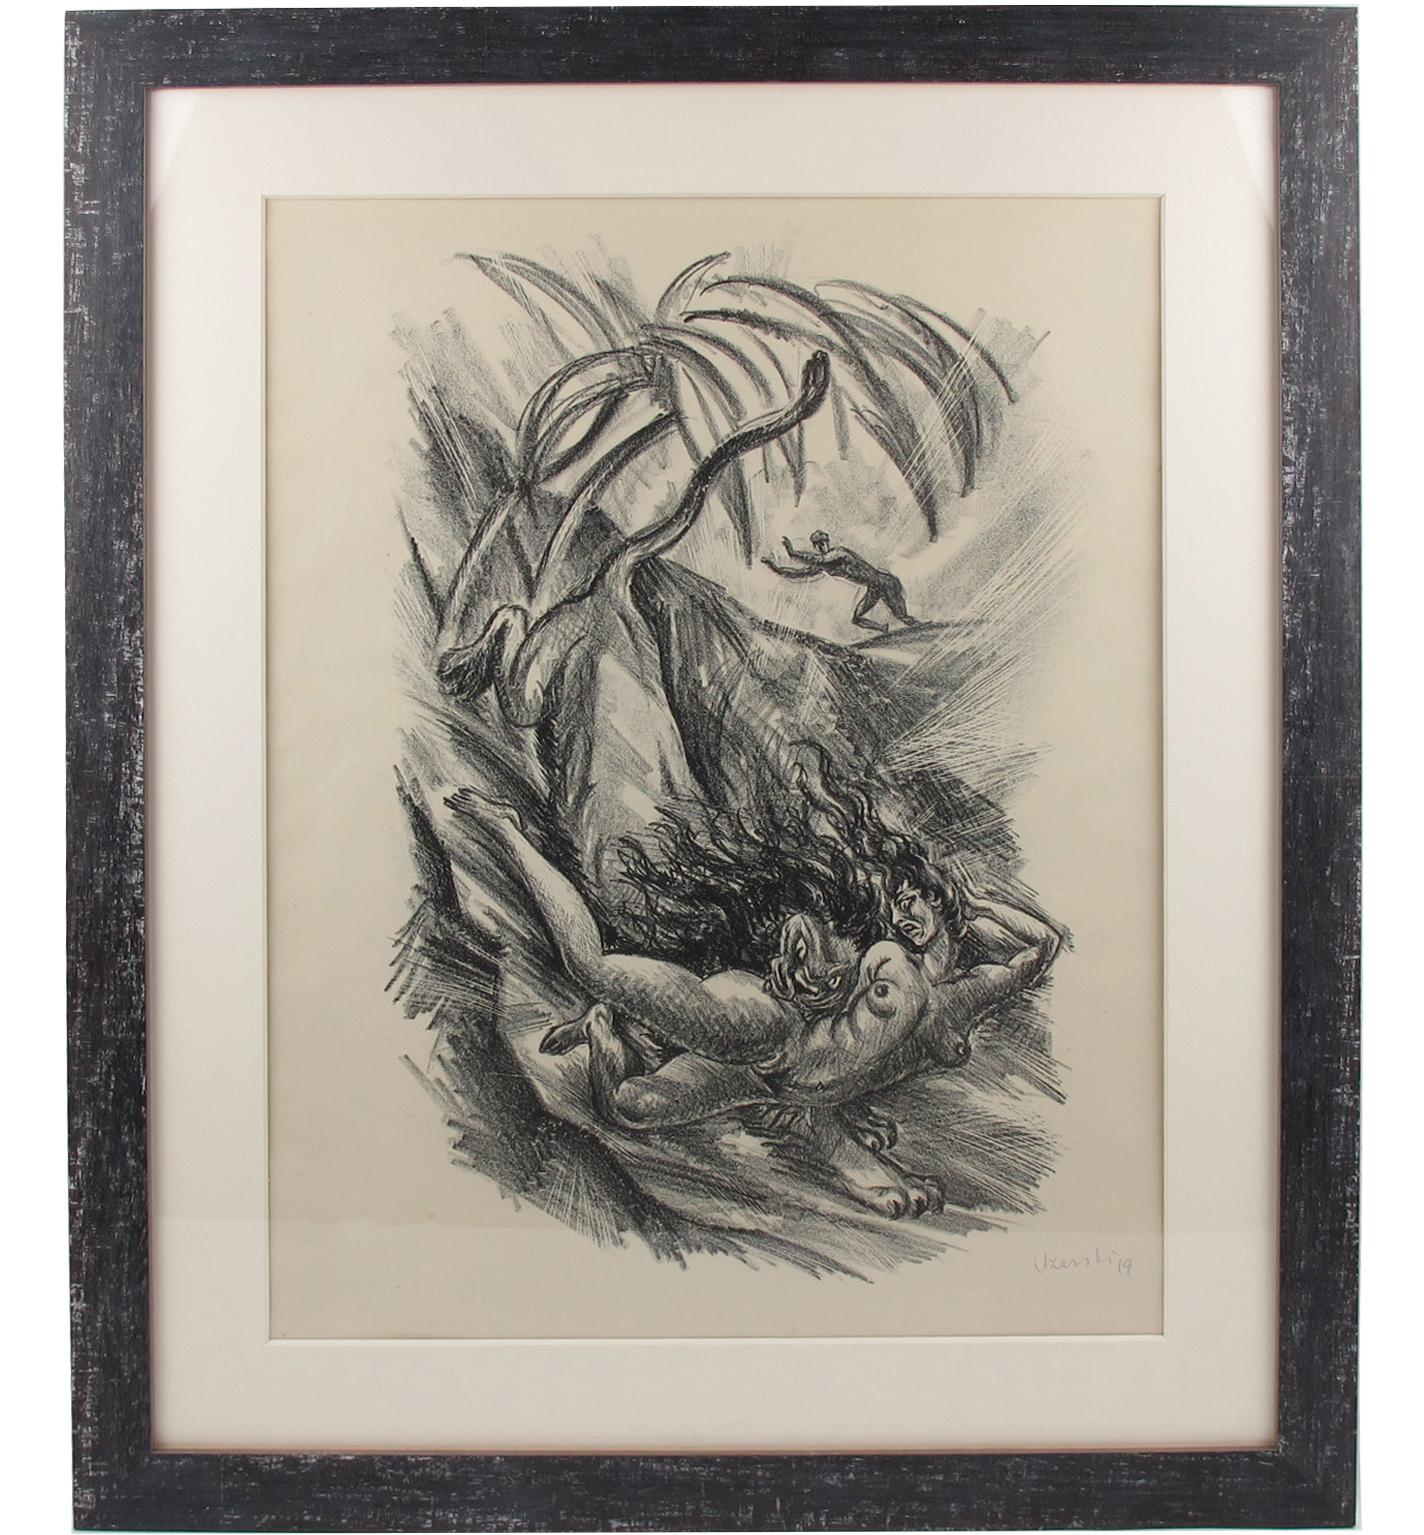 Art Deco Fantasy Charcoal Drawing Lithograph Print by Adolf Uzarski For Sale 2